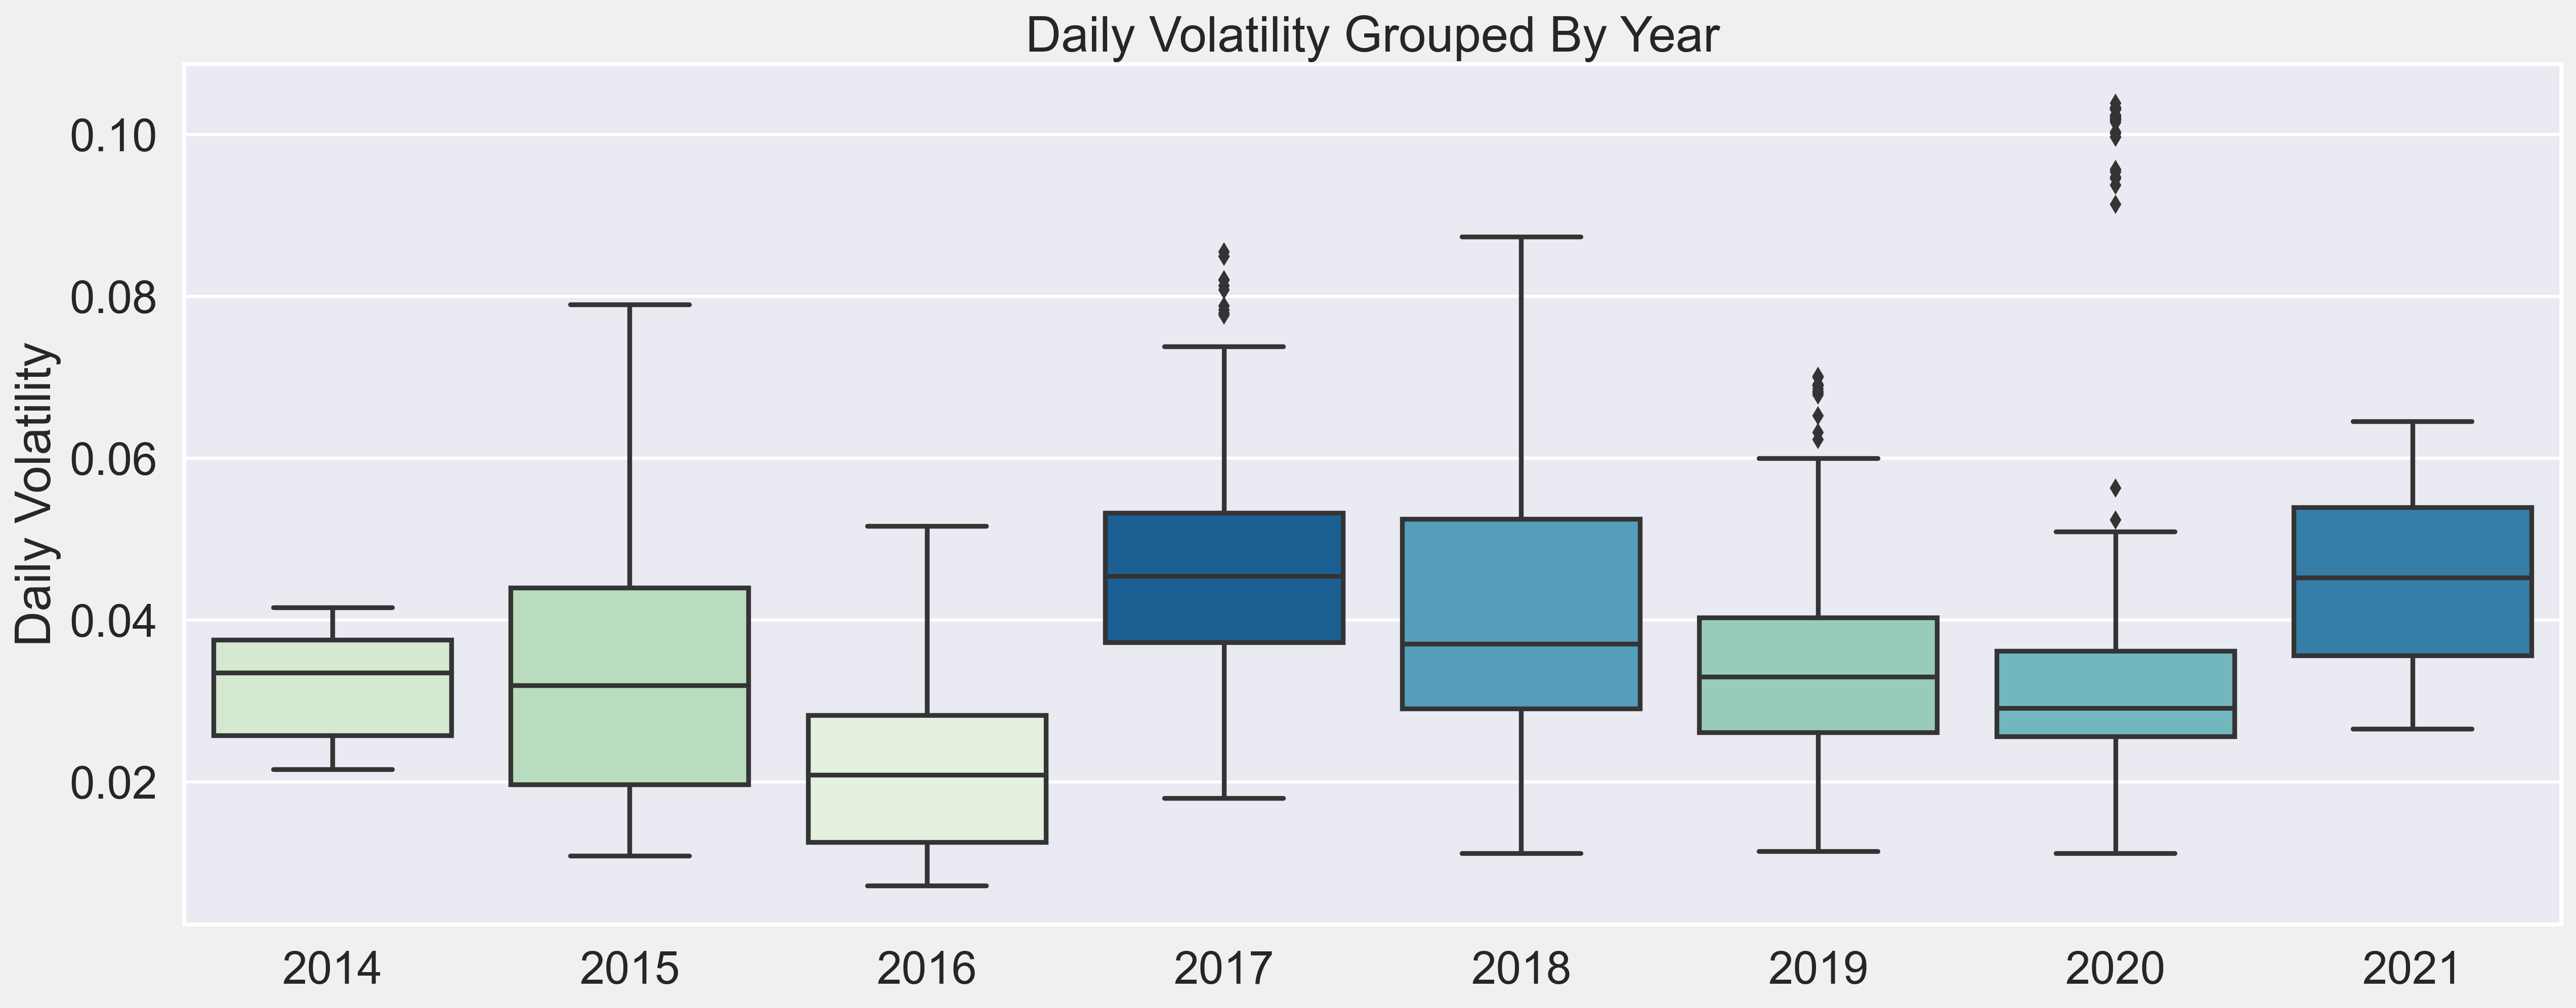 Daily Volatility Grouped by Year